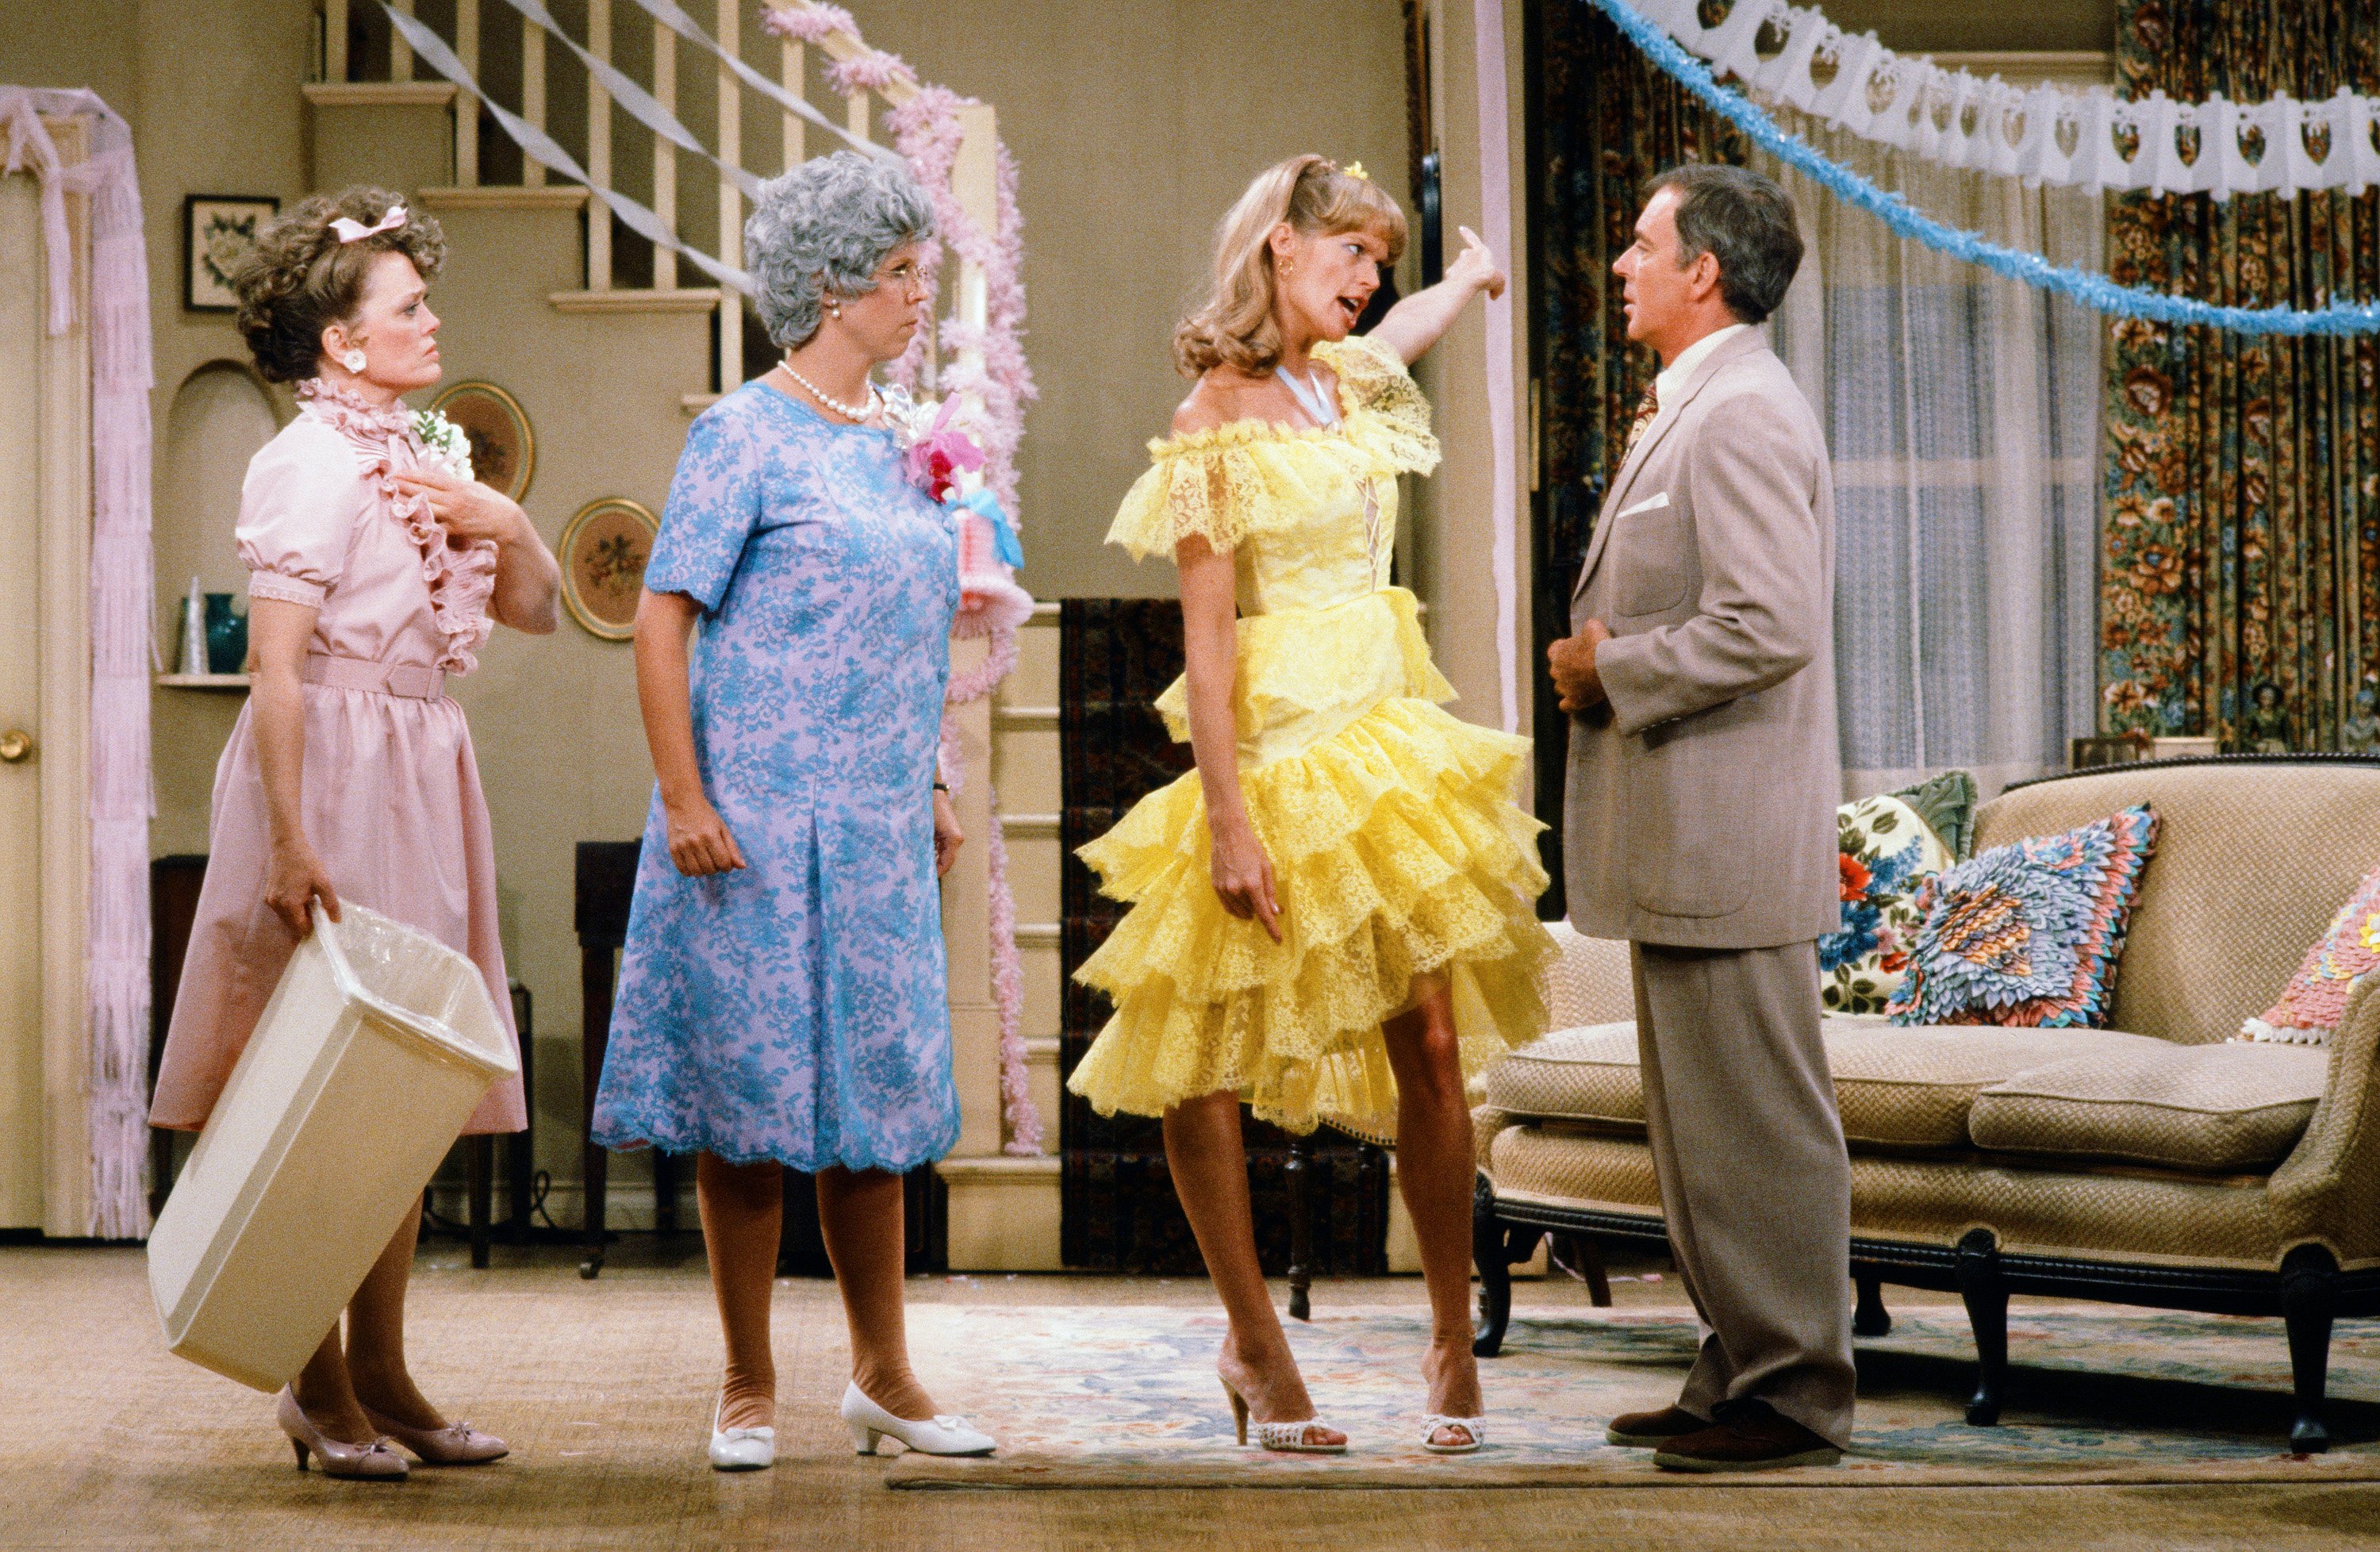 Rue McClanahan in a pink dress, Vicki Lawrence in a blue floral dress, Dorothy Lyman in a yellow dress, and Ken Berry in a tan suit film a scene for 'Mama's Family.'